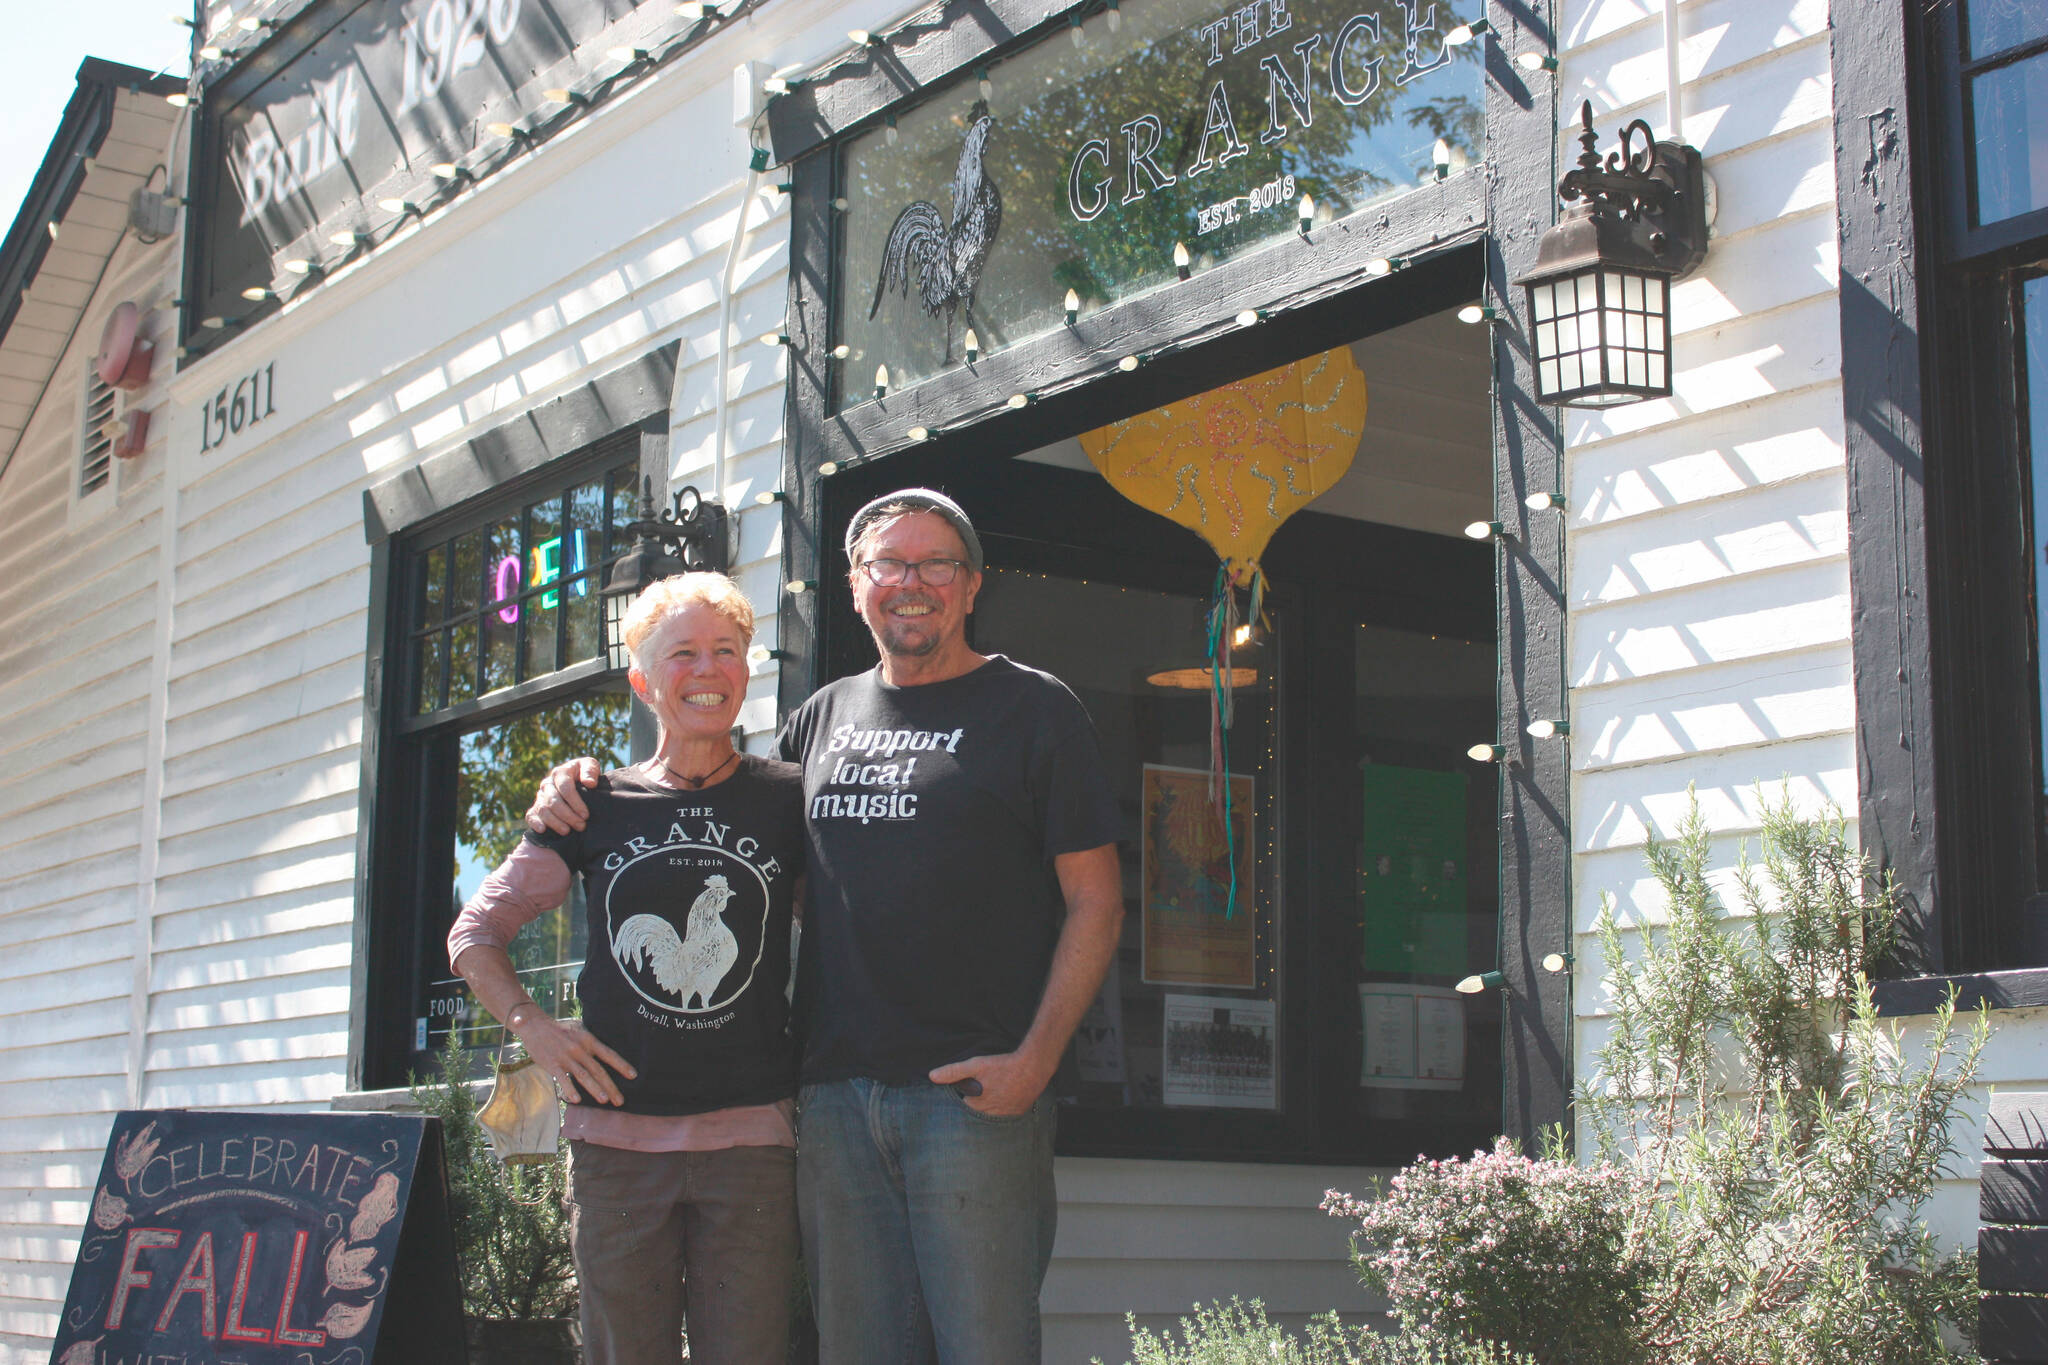 Co-owners Sarah Cassidy and Luke Woodward stand in front of The Grange, 15611 Main St. NE, Duvall. Photo by Cameron Sheppard/Sound Publishing
Co-owners Sarah Cassidy and Luke Woodward stand in front of The Grange, 15611 Main St. NE, Duvall. Photo by Cameron Sheppard/Sound Publishing